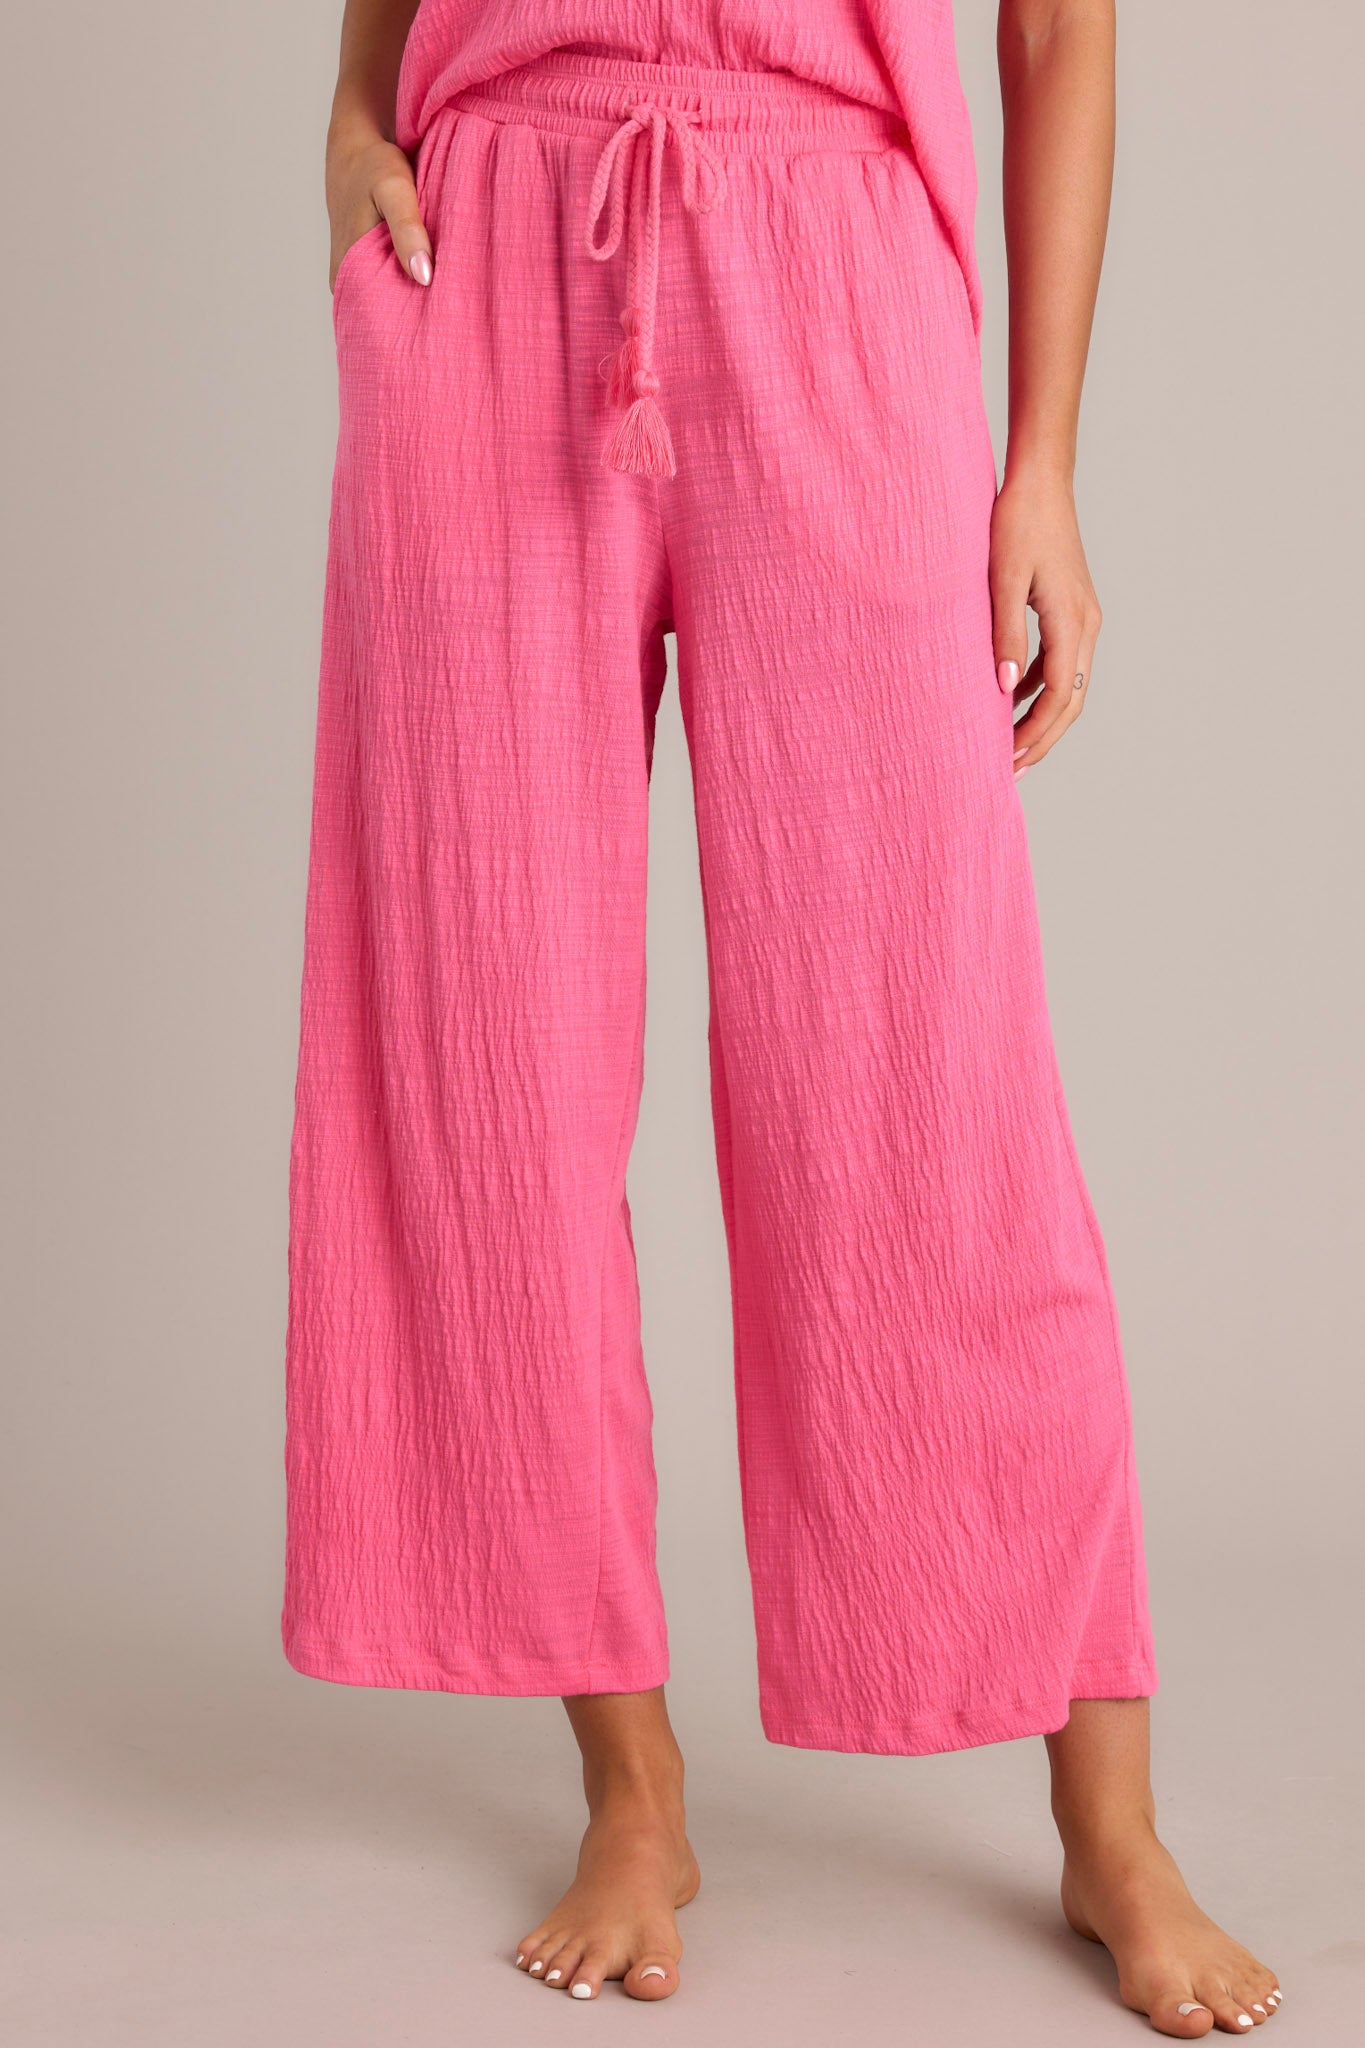 Close-up view of pink pants showcasing the high-waisted design, elastic waistband, and wide leg.